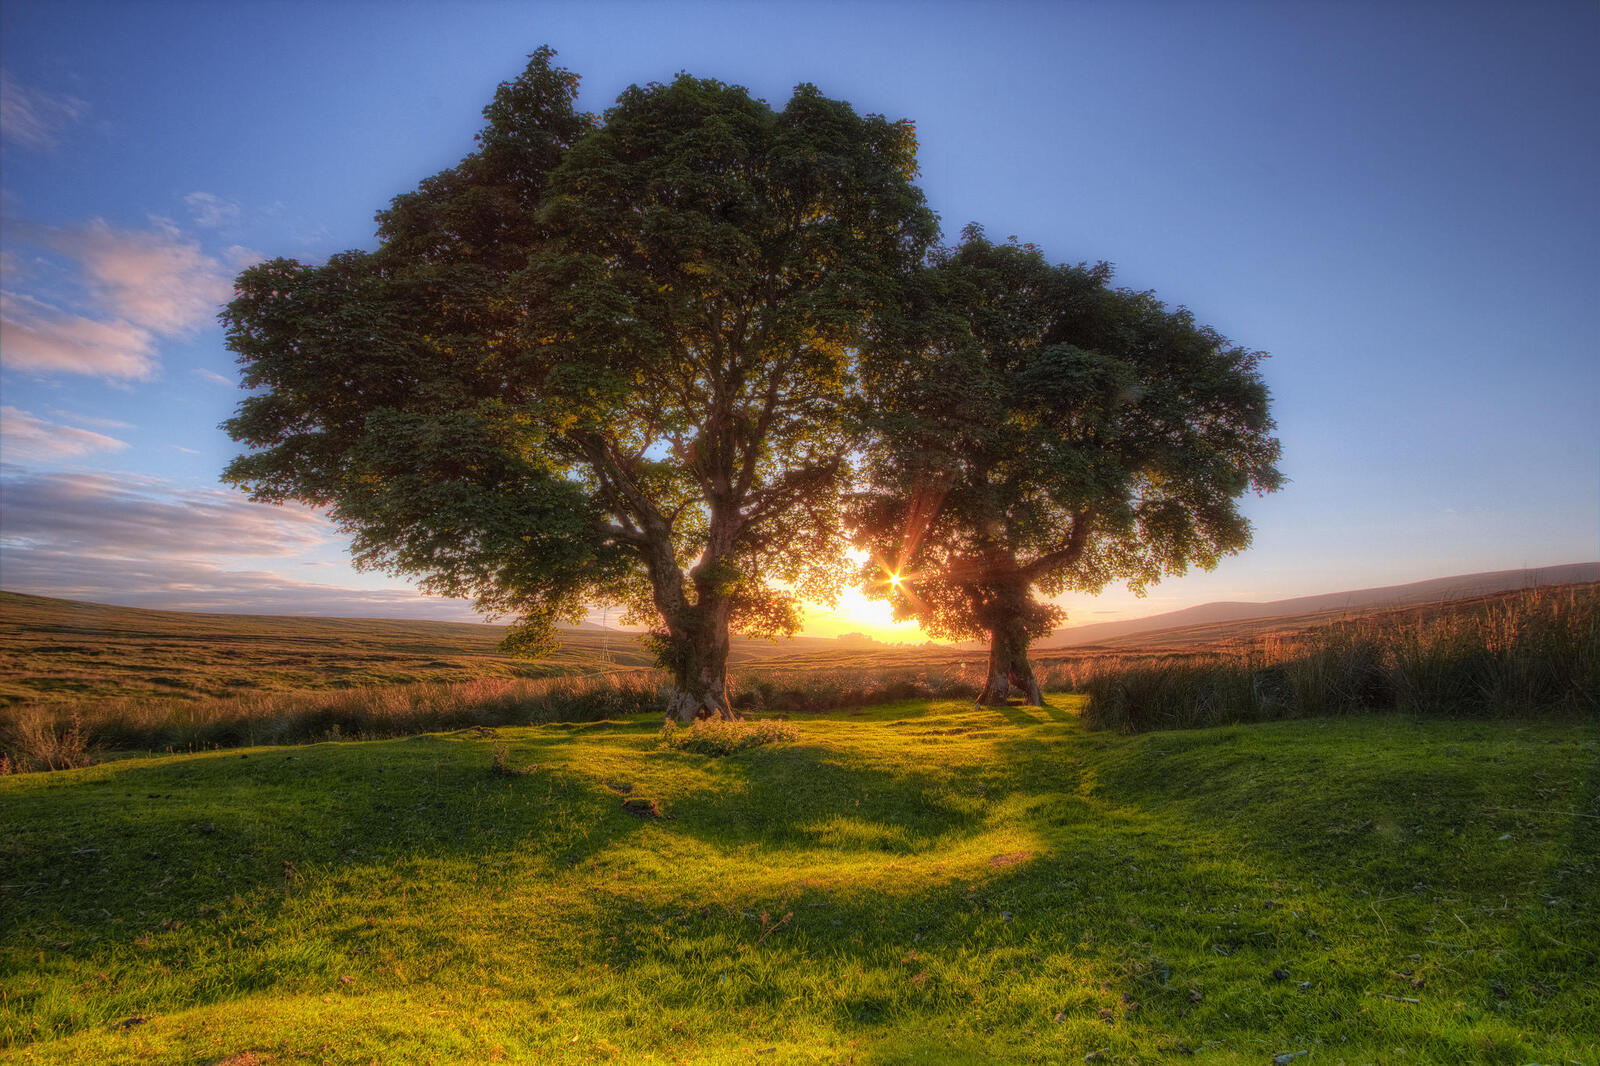 Two old trees in a large field during sunset